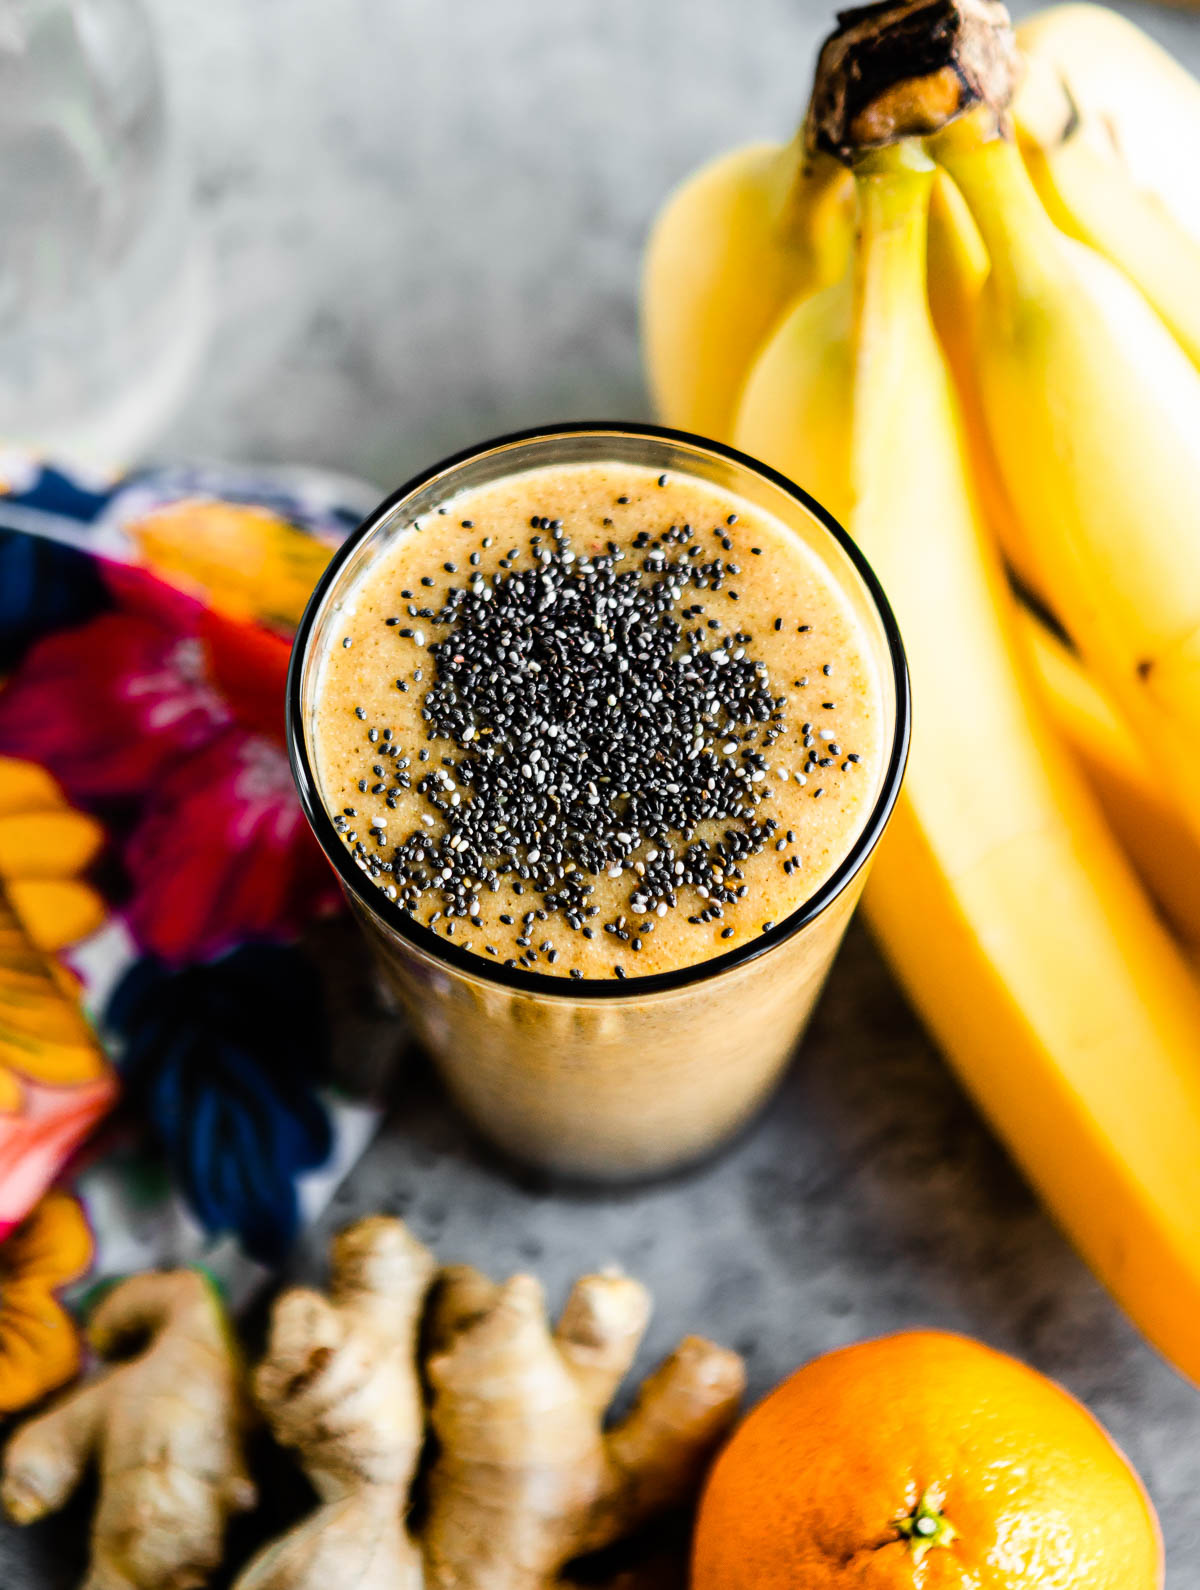 orange hangover smoothie in glass topped with black chia seeds.